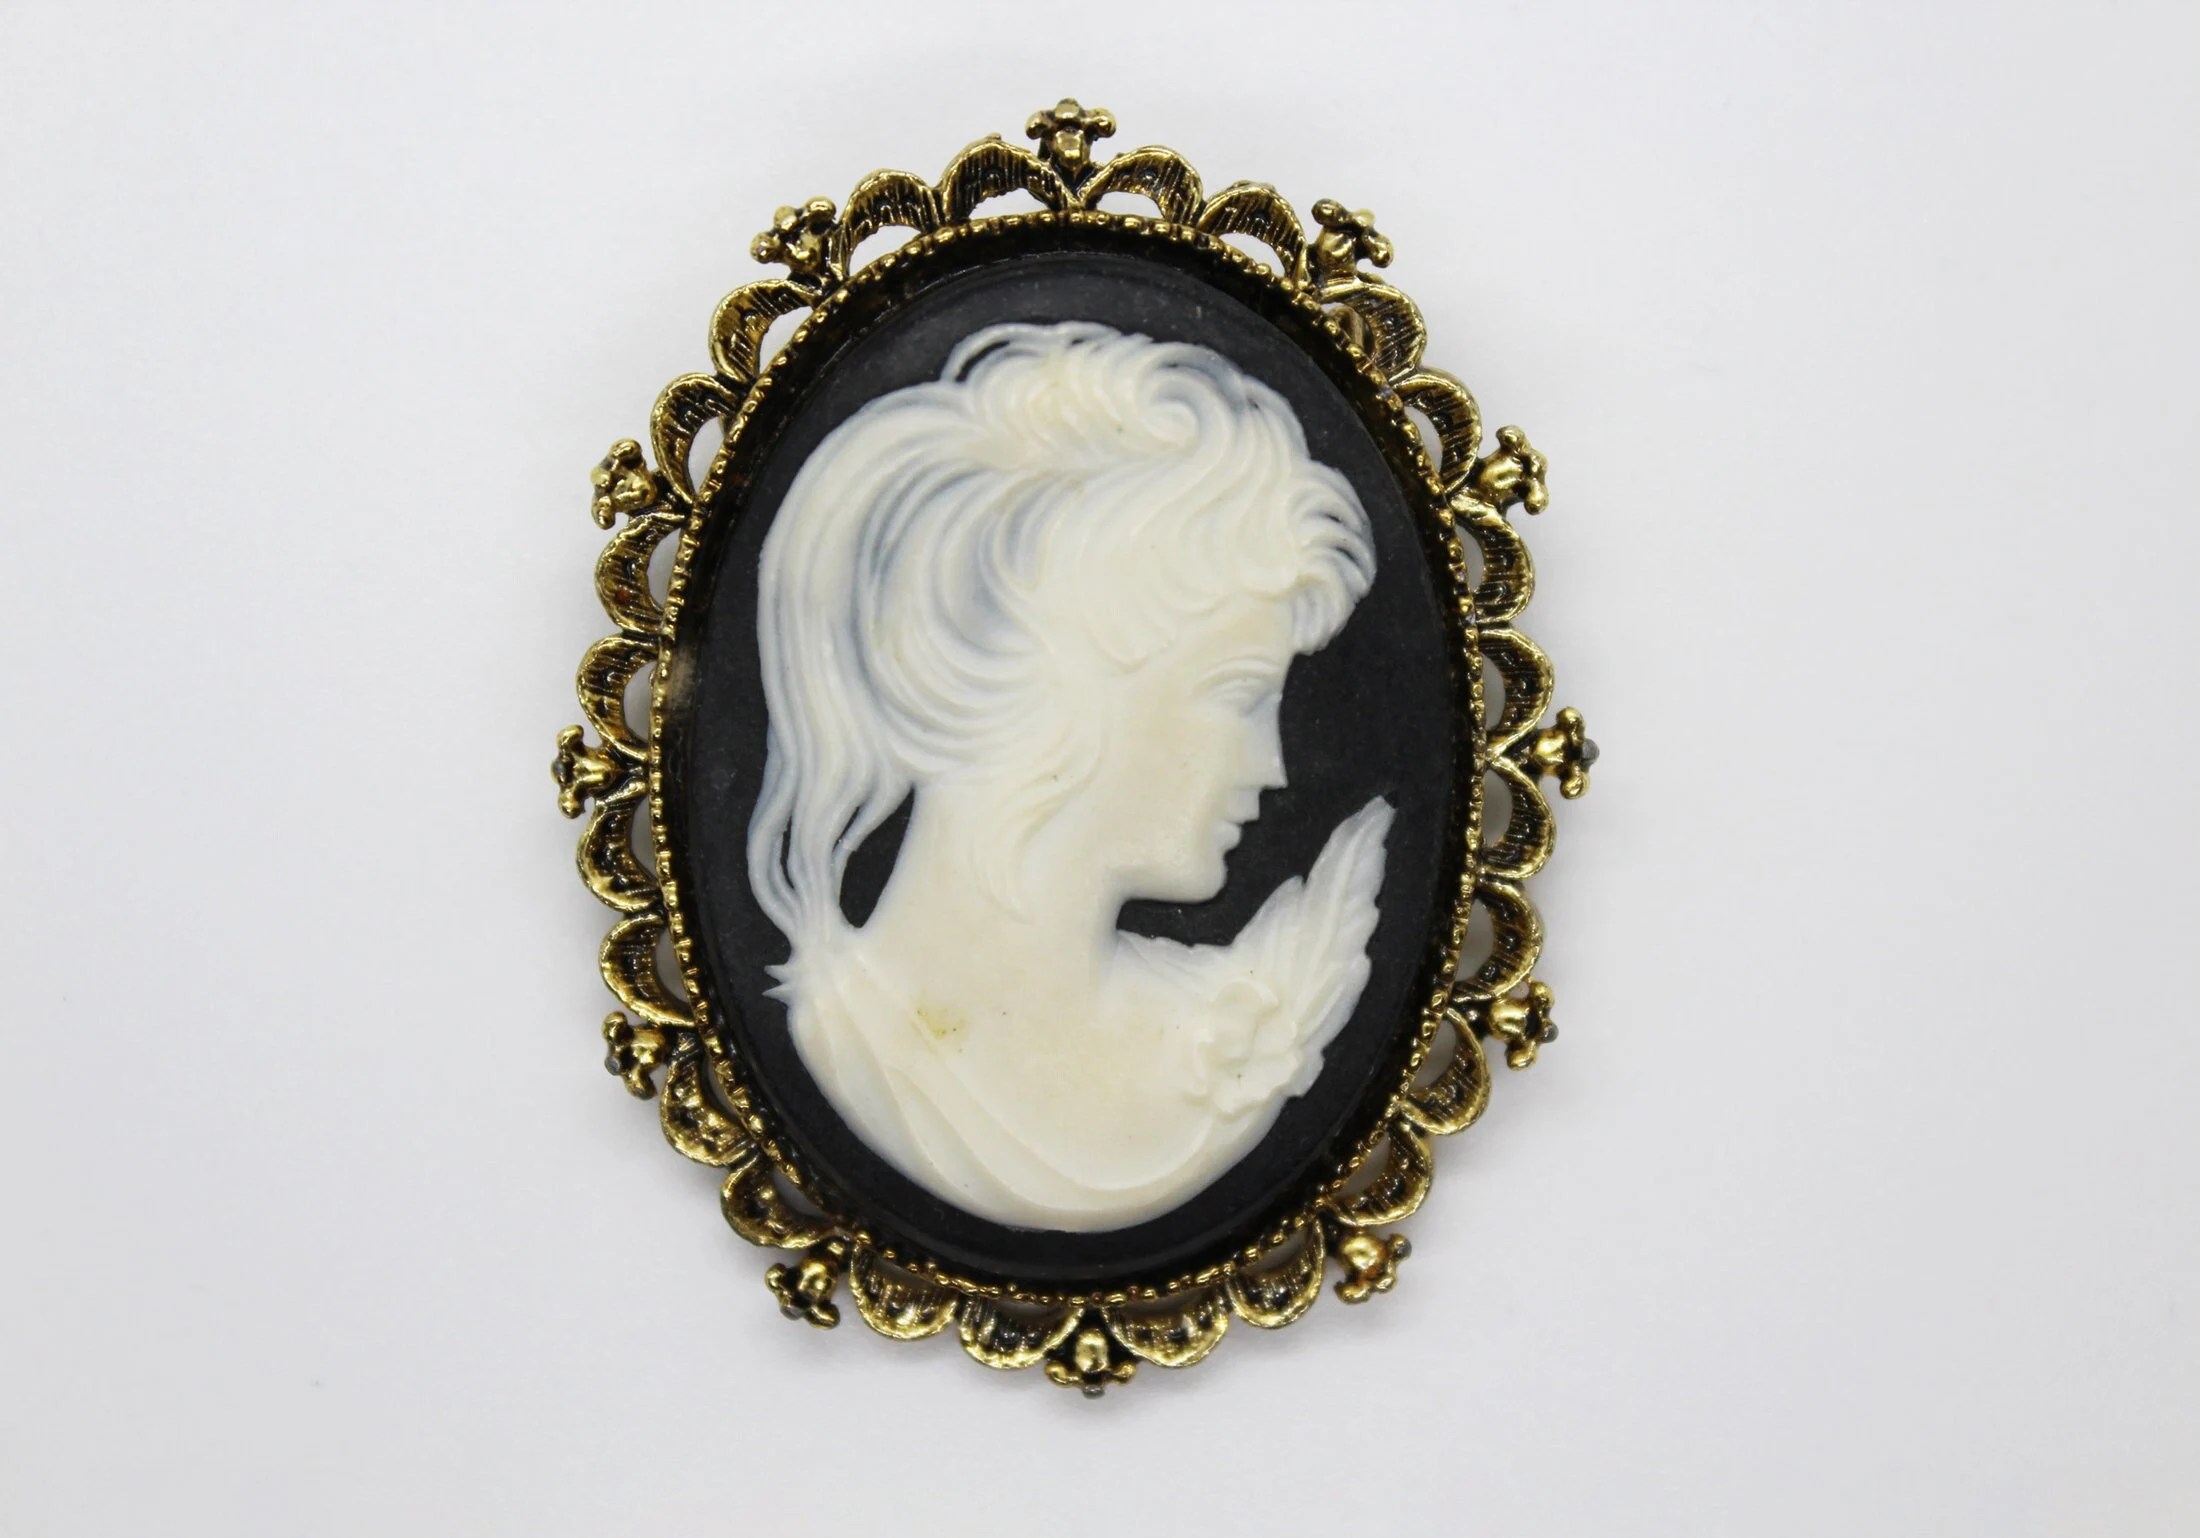 1960s Gerry's Signed Black & White Cameo Brooch in Gold Tone Frame - Vintage, Victorian Revival, Mid Century, Art Nouveau Costume Jewelry